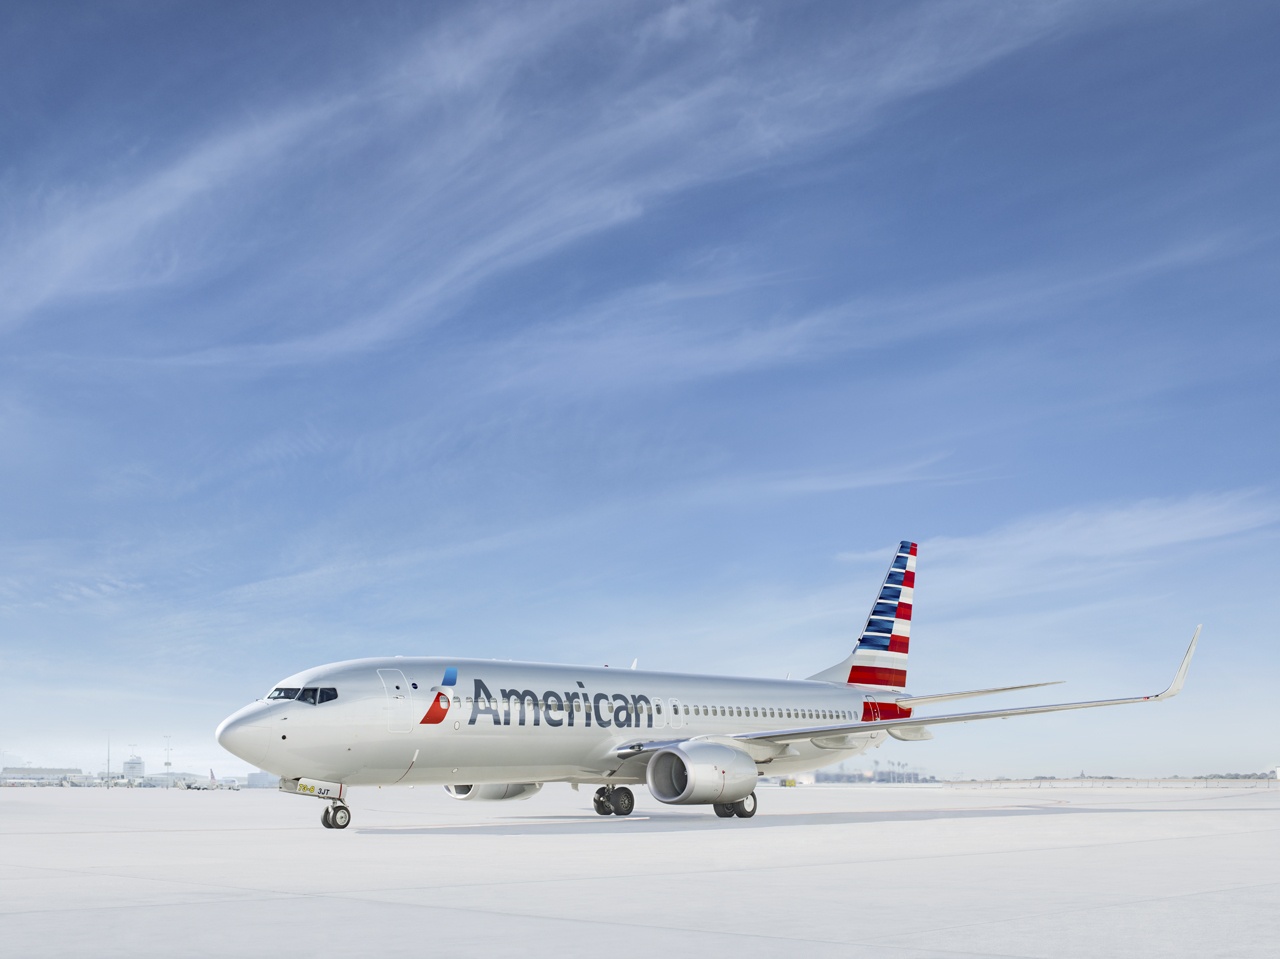 American Airlines launches two new daily nonstop services